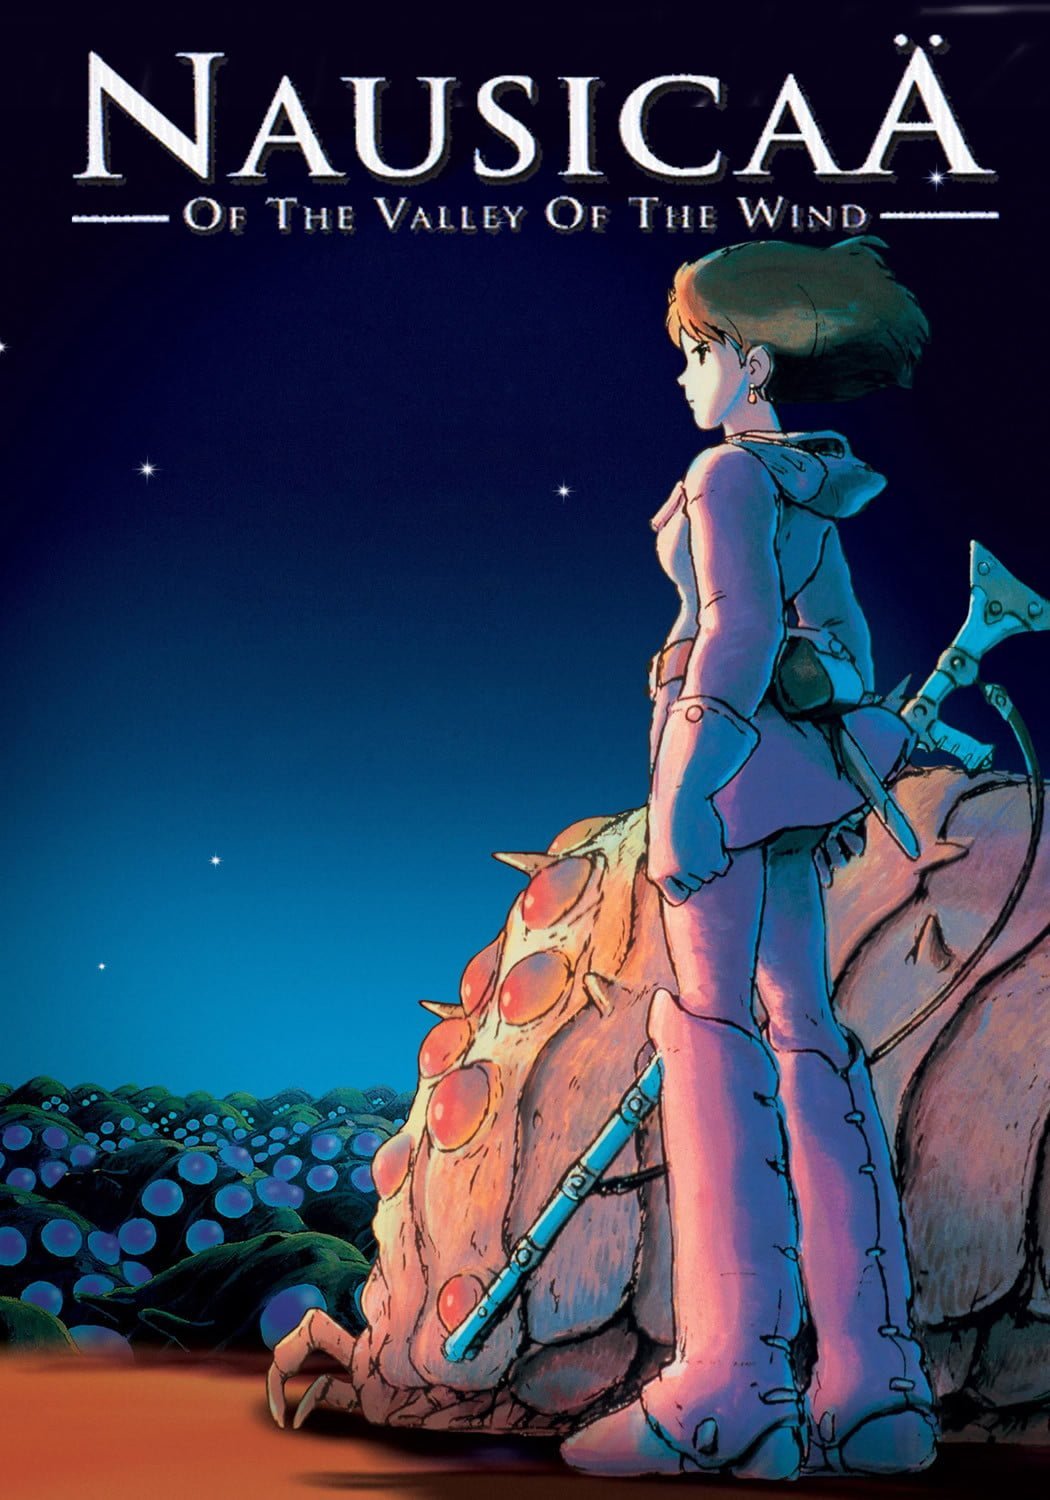 Shia Labeouf premier film:  Nausicaä of the Valley of the Wind 